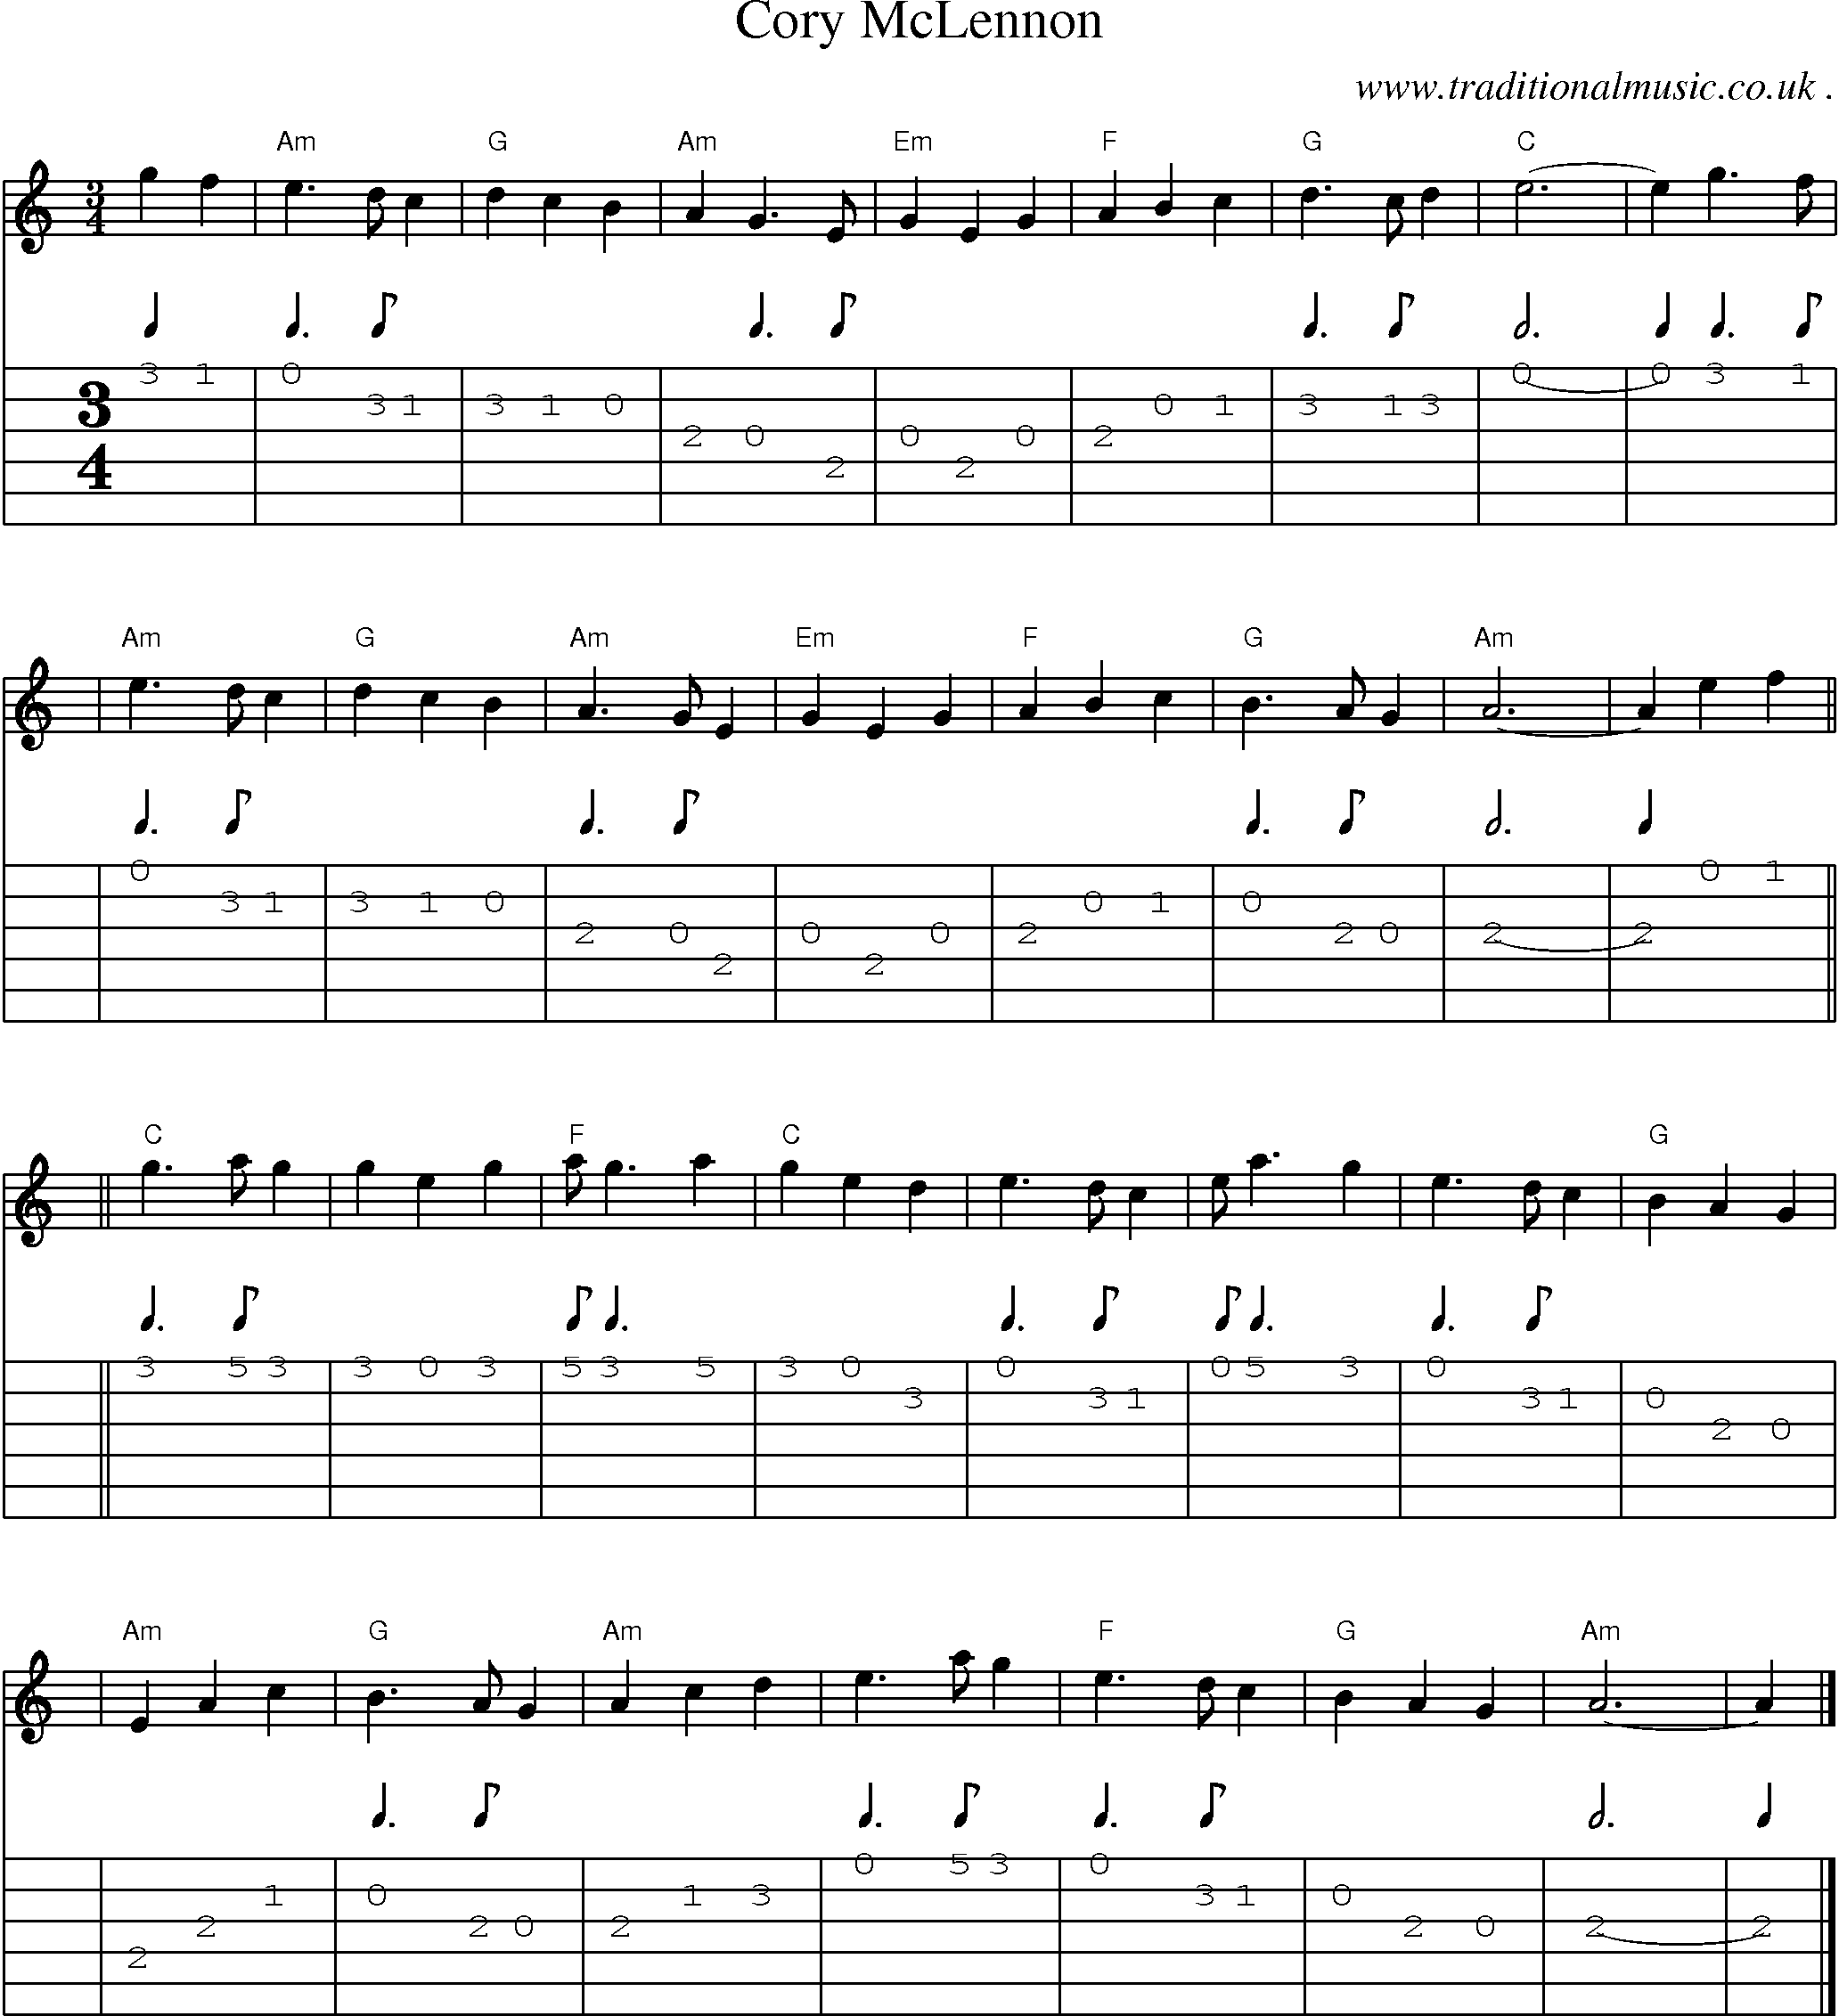 Sheet-music  score, Chords and Guitar Tabs for Cory Mclennon